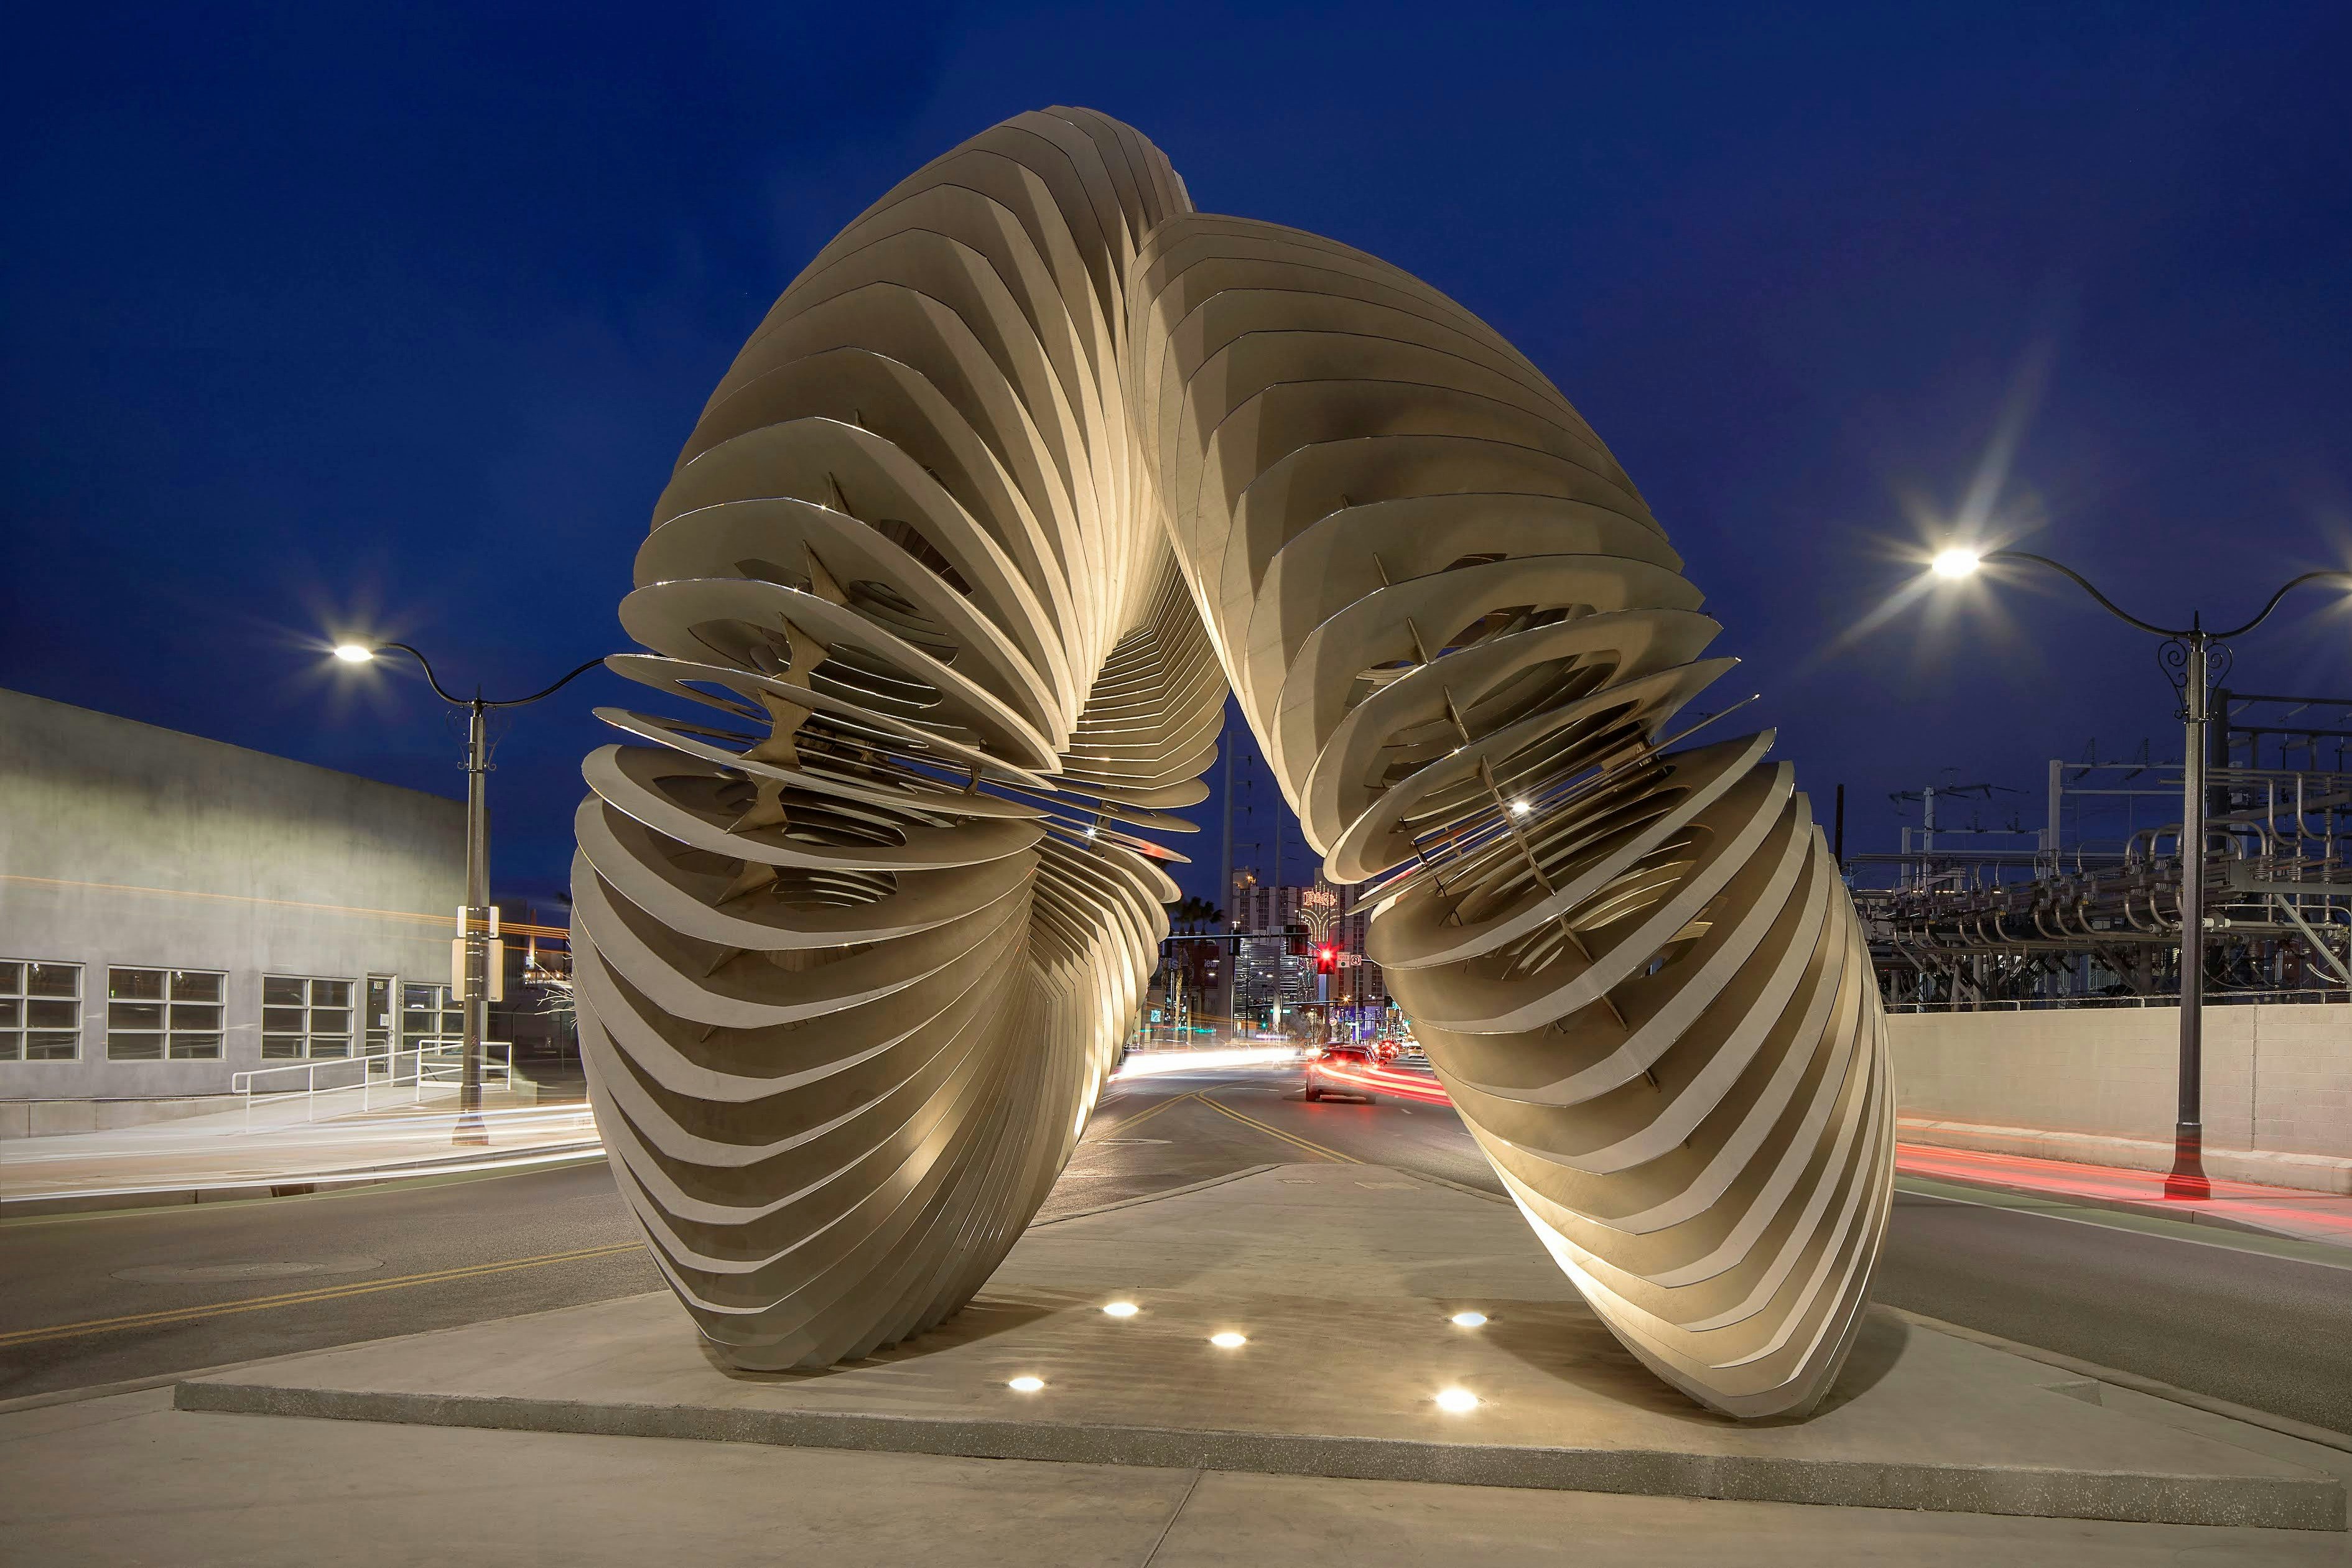 Luis Varela-Rico’s 'Radial Symmetry' sculpture at night; two large, circular forms, comprised of individual metal sheets, lean against one another on the sidewalk. 